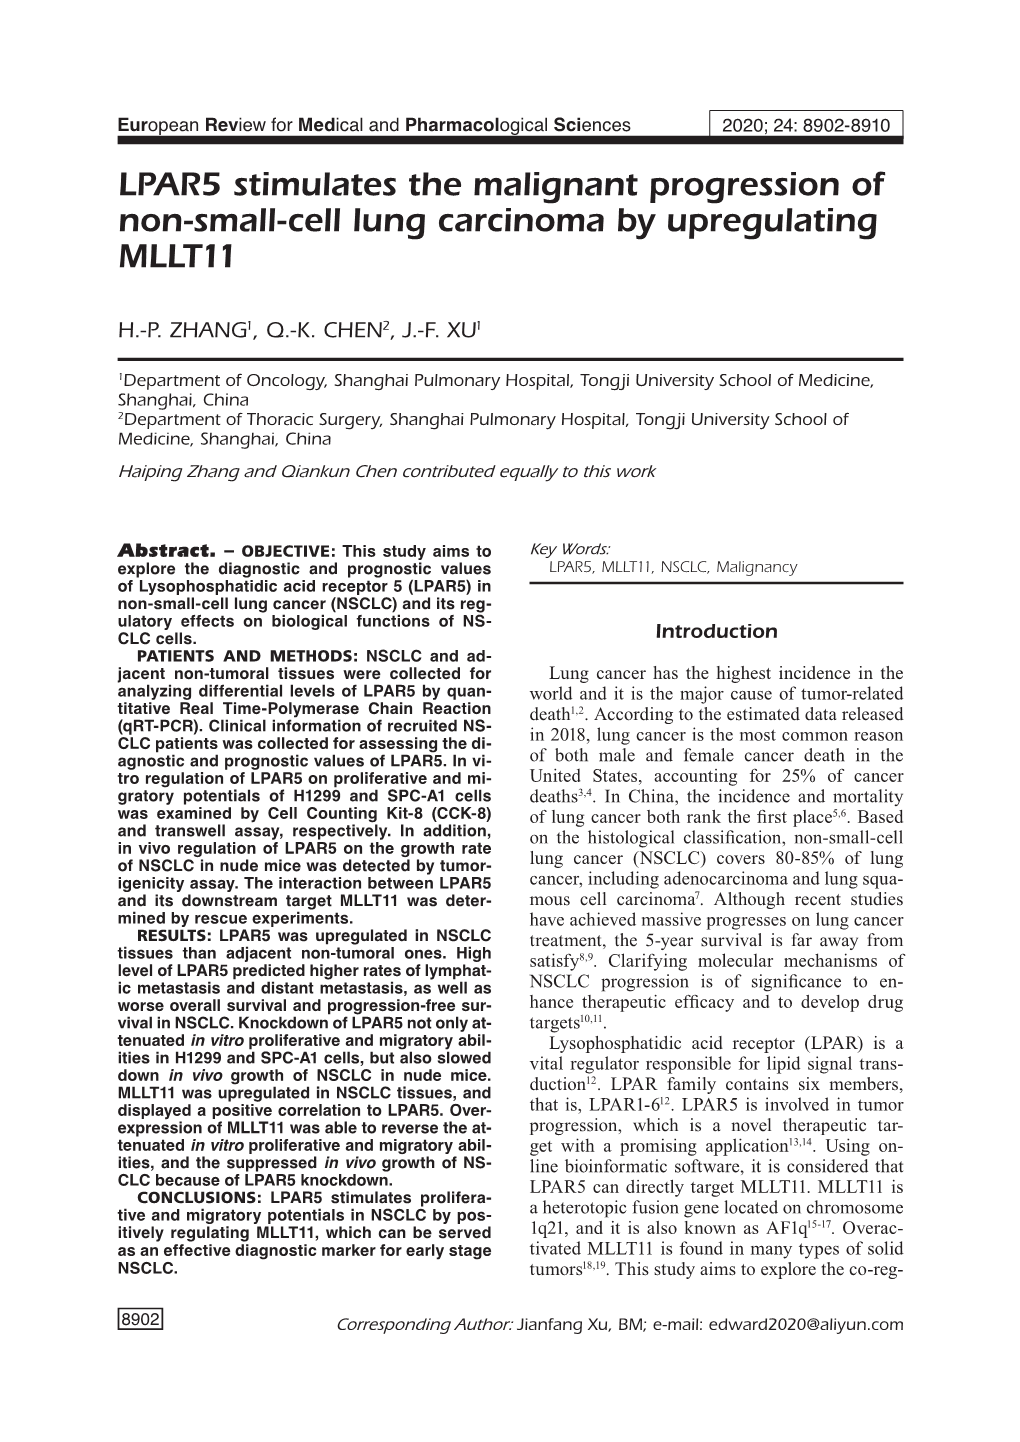 LPAR5 Stimulates the Malignant Progression of Non-Small-Cell Lung Carcinoma by Upregulating M L LT11